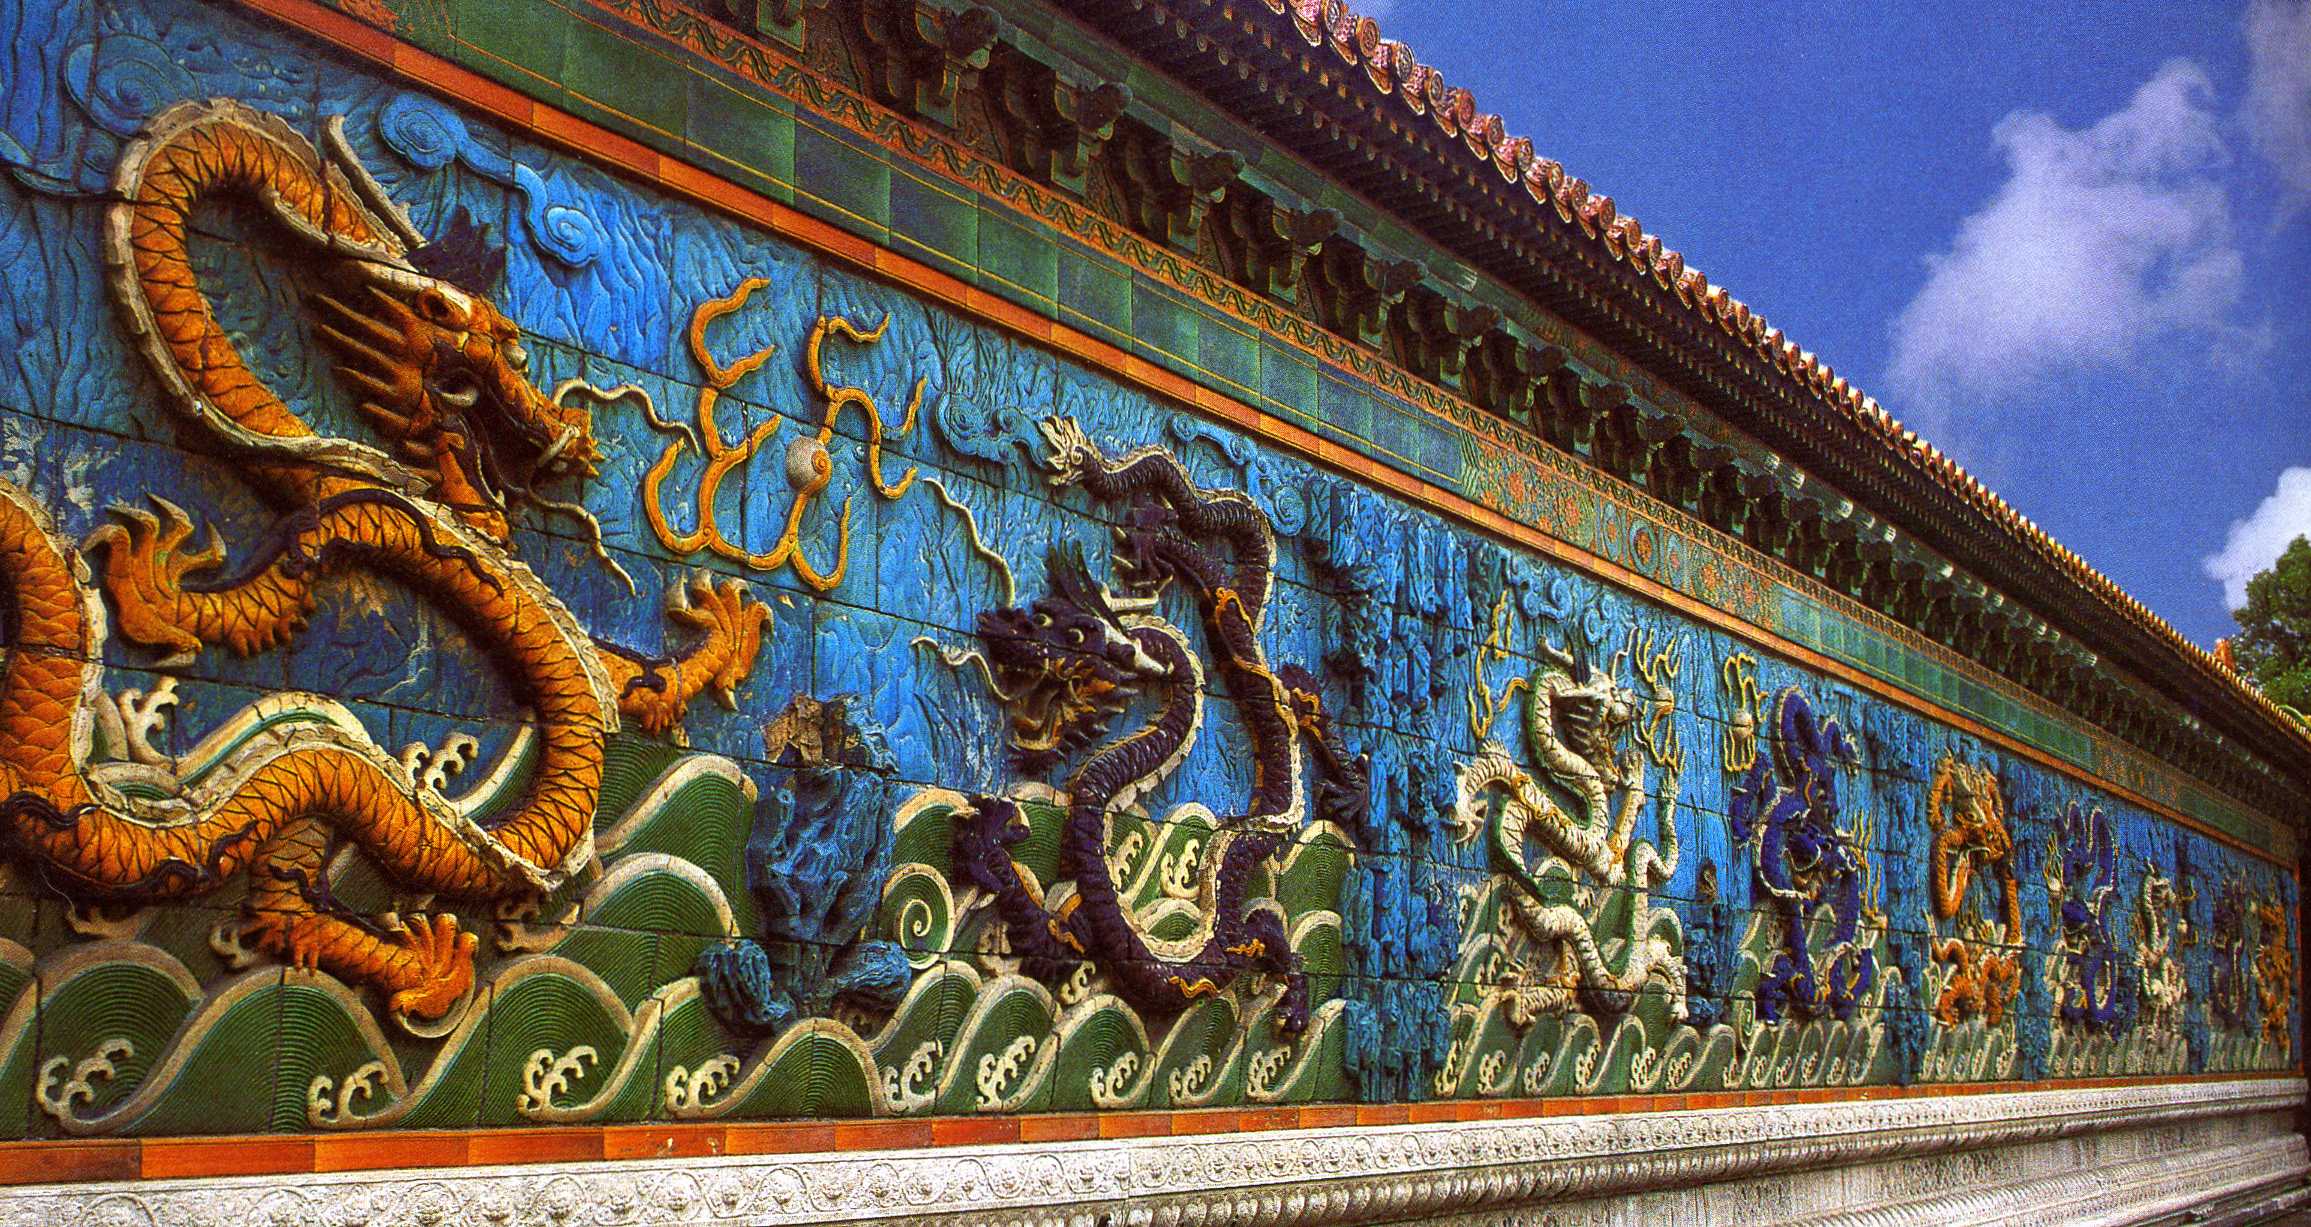 Nine Dragon Wall in the Forbidden City in Beijing, China.